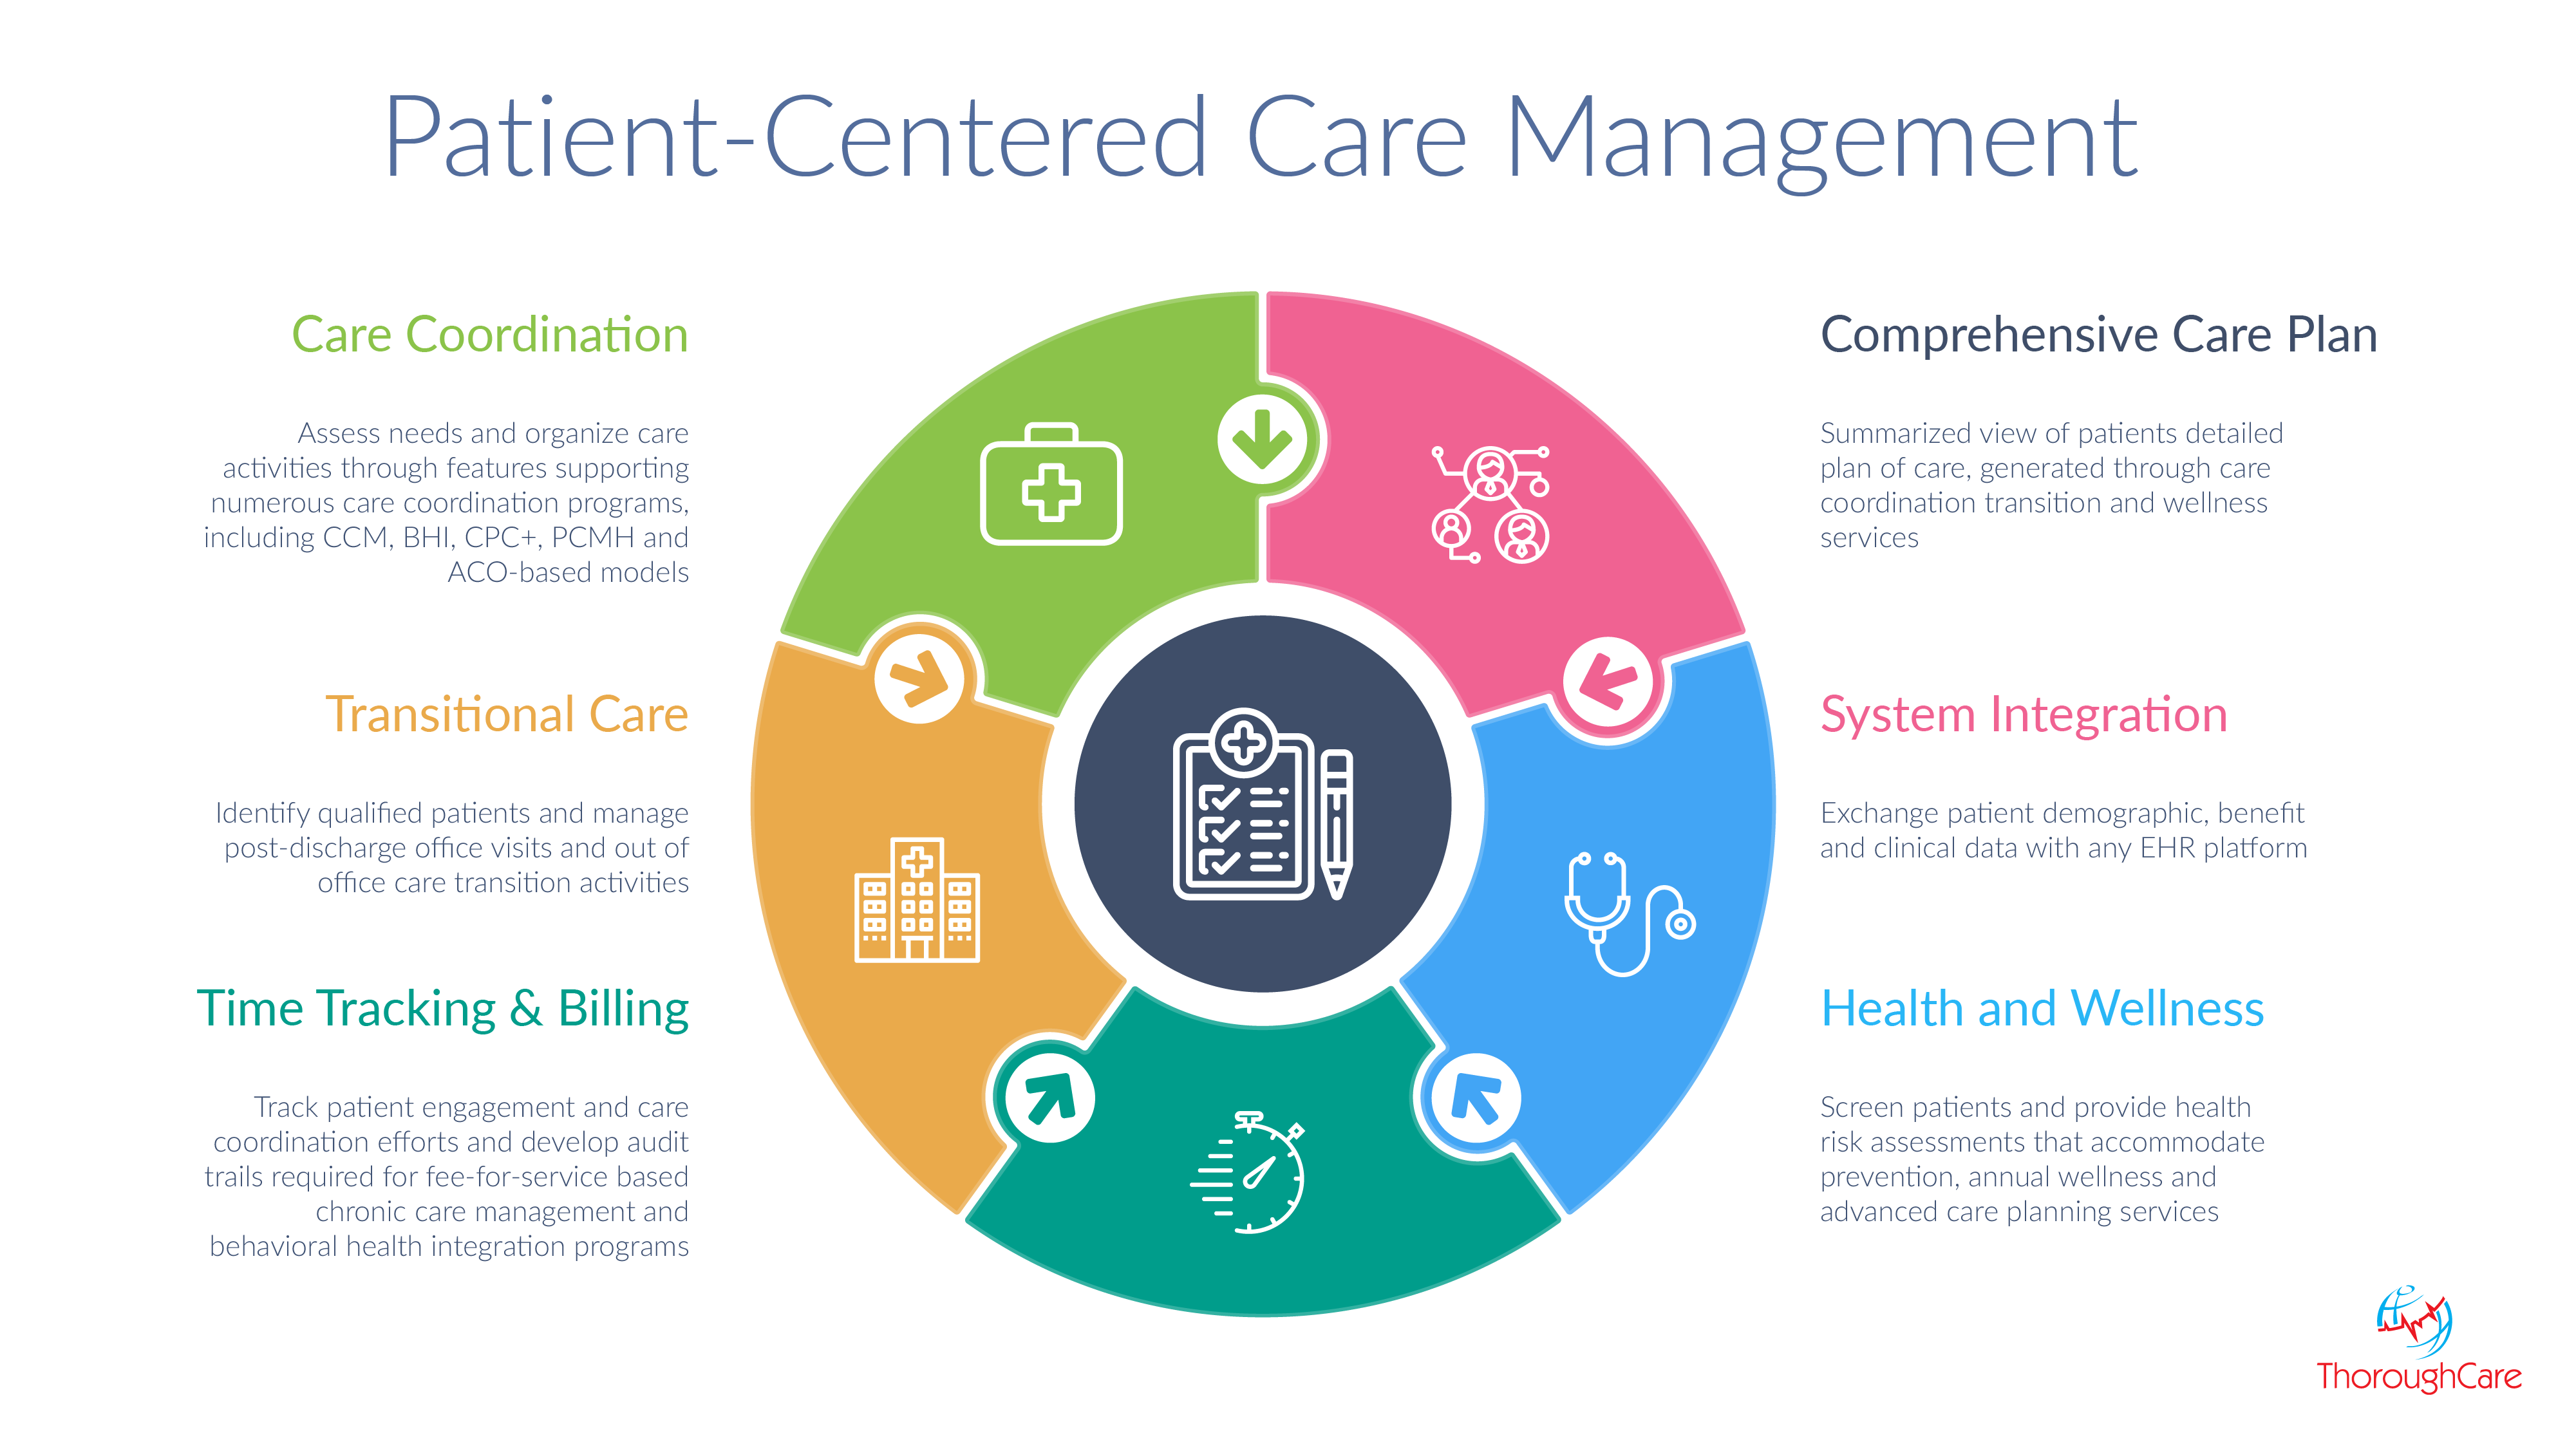 What is a Patient-Centered Care Plan?